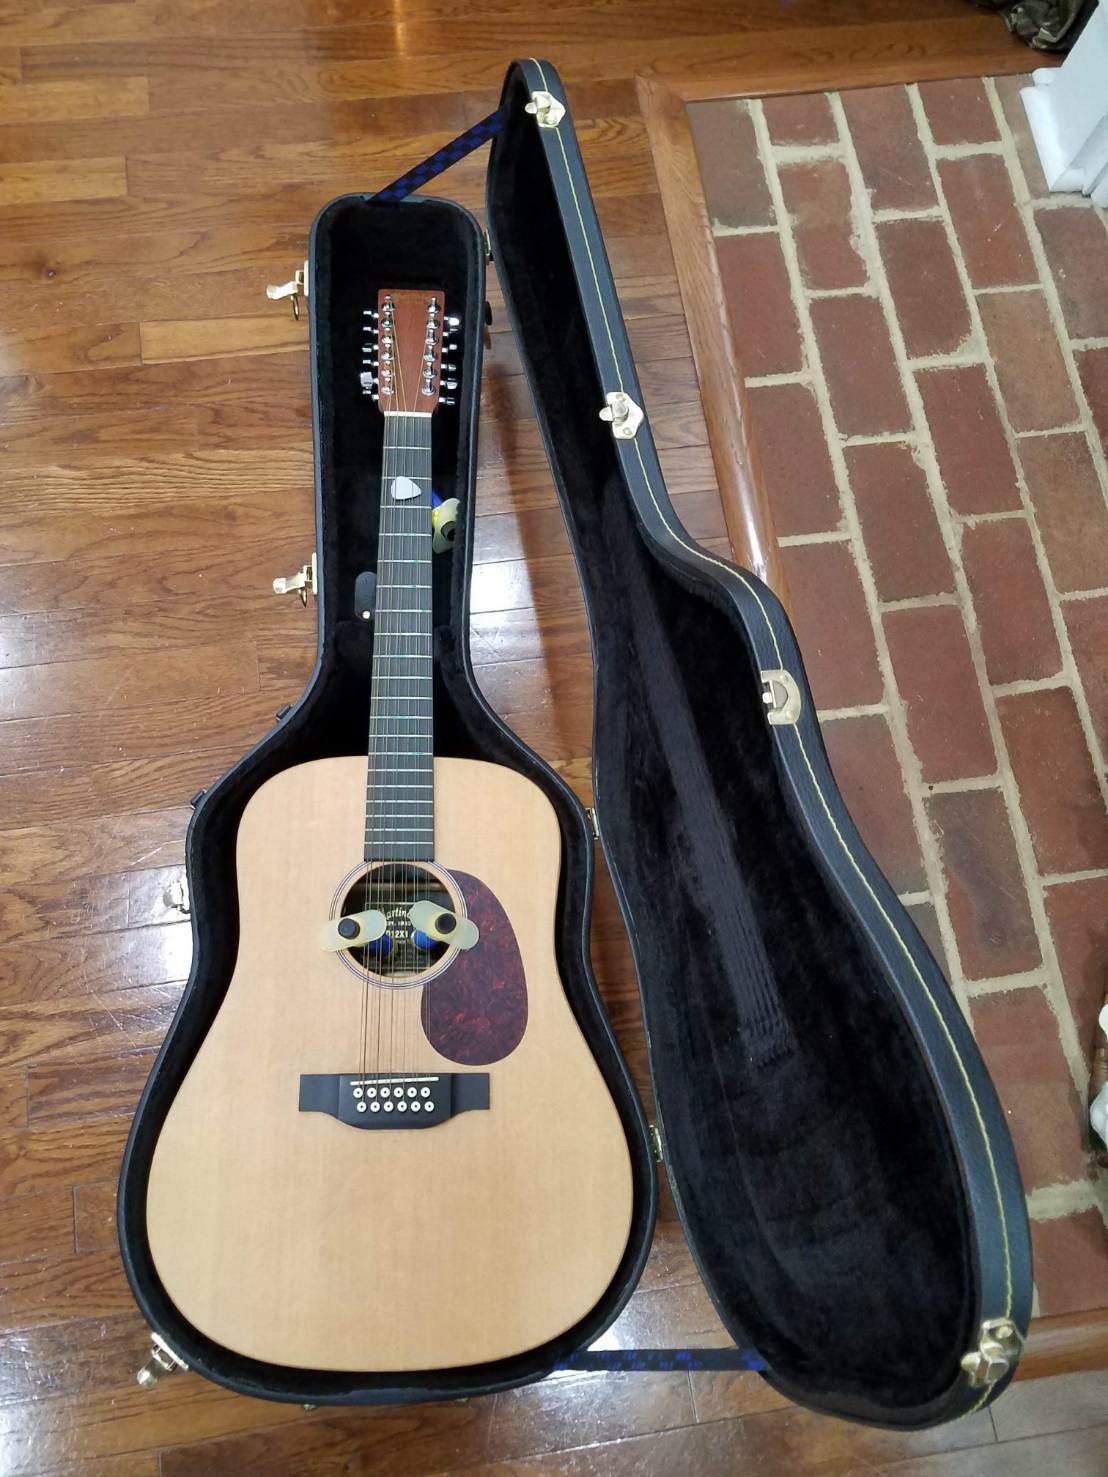 Martin 12 strings with L.R baggs active pickup